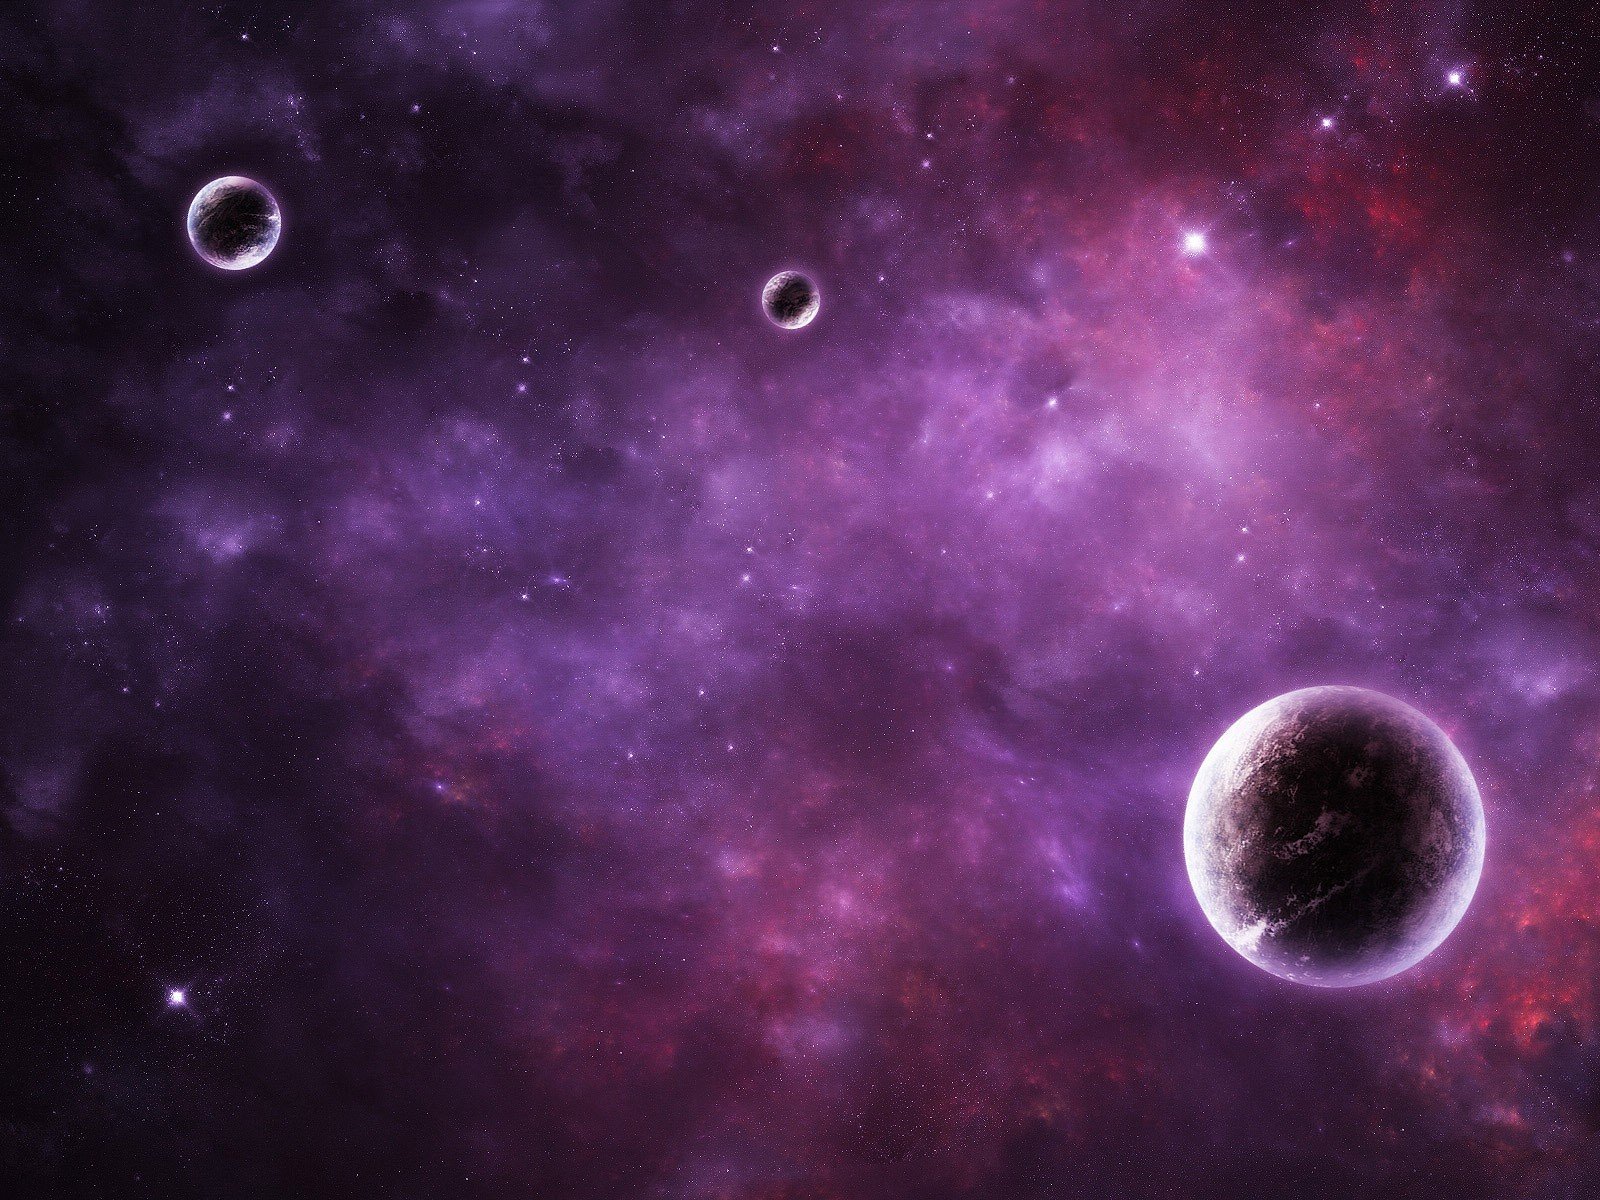 Wallpaper, 1600x1200 px, galaxies, nebulae, outer, pink, planets, purple, space, stars 1600x1200